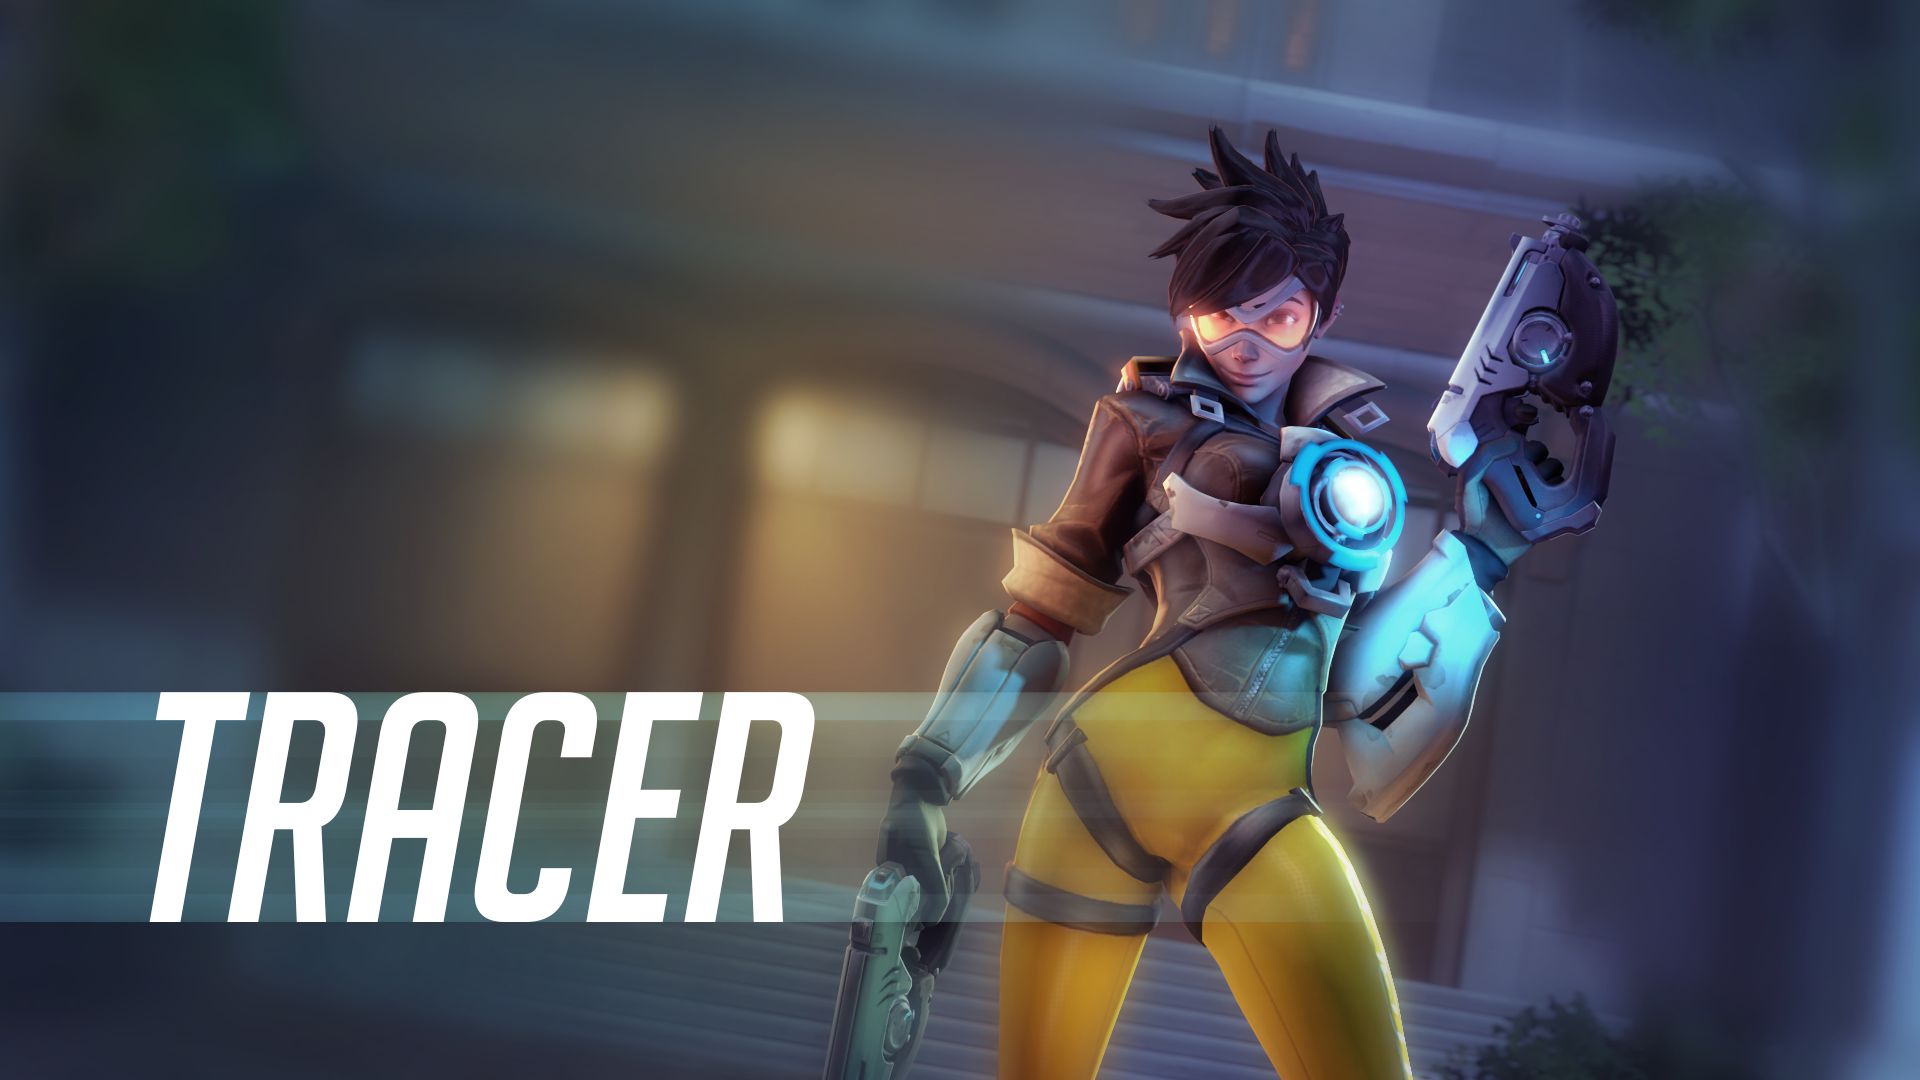 video game, overwatch, blizzard entertainment, lena oxton, tracer (overwatch)